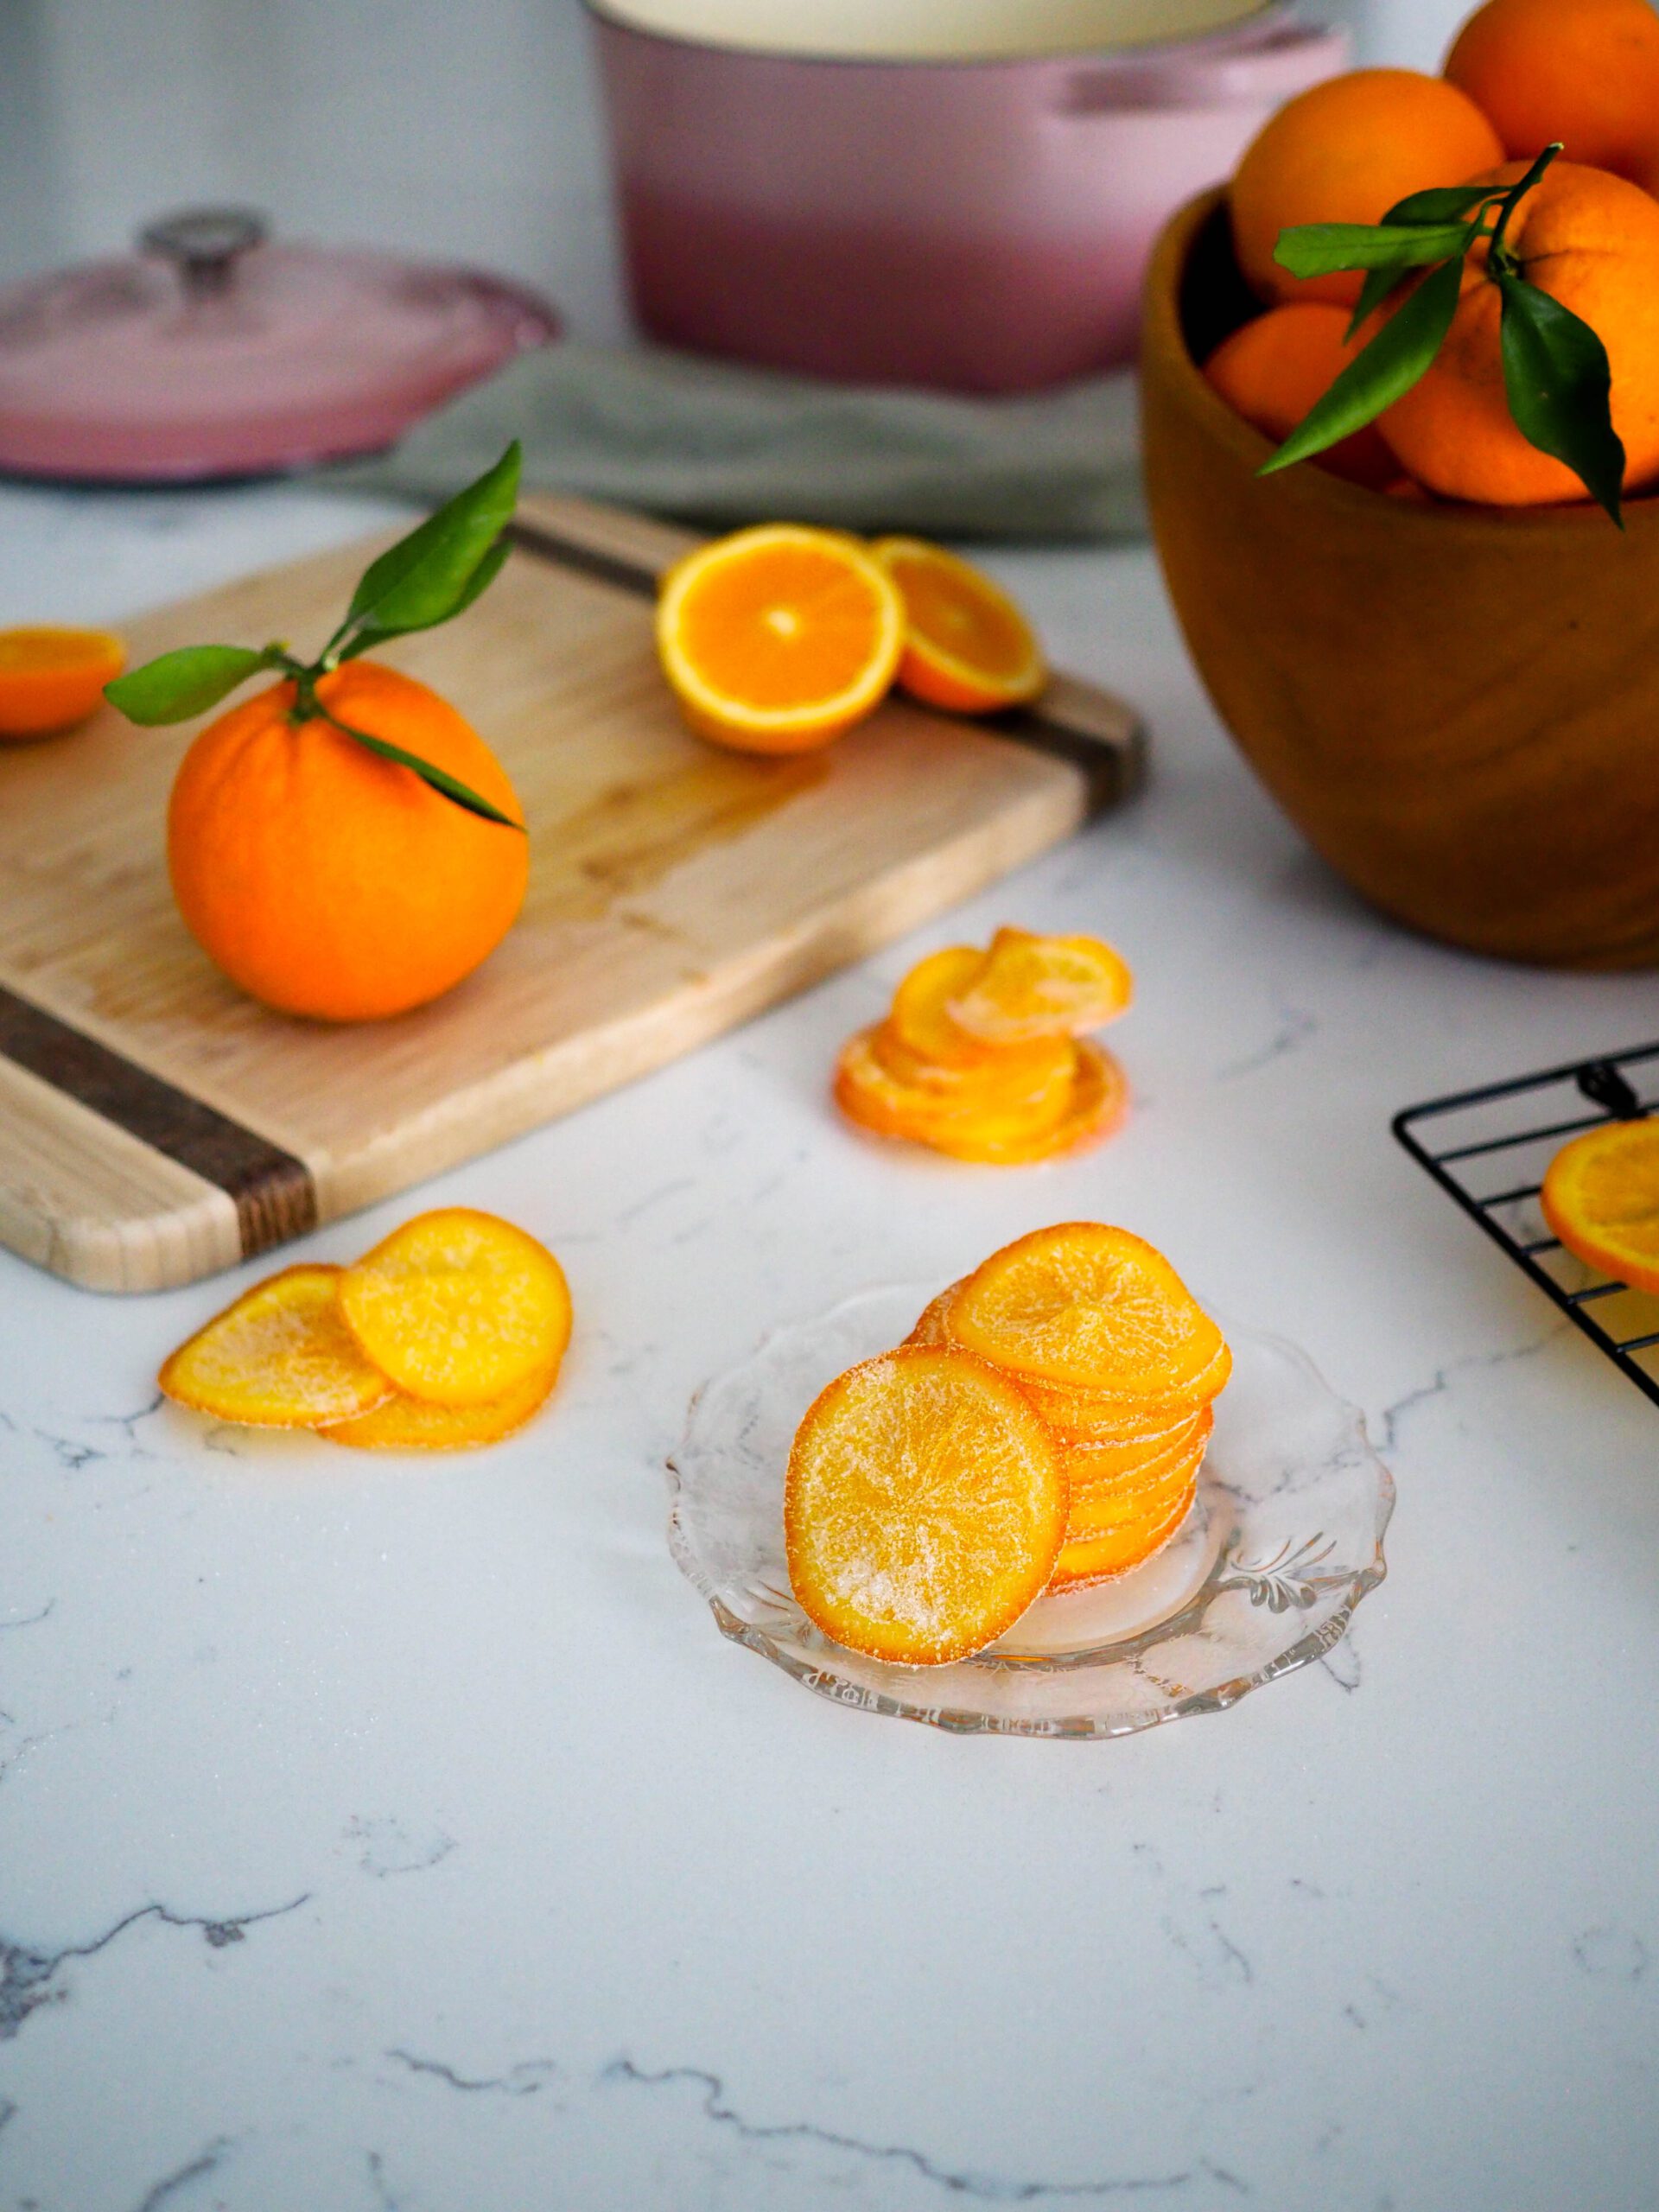 A stack of candied orange slices on a glass plate with styled oranges around it.